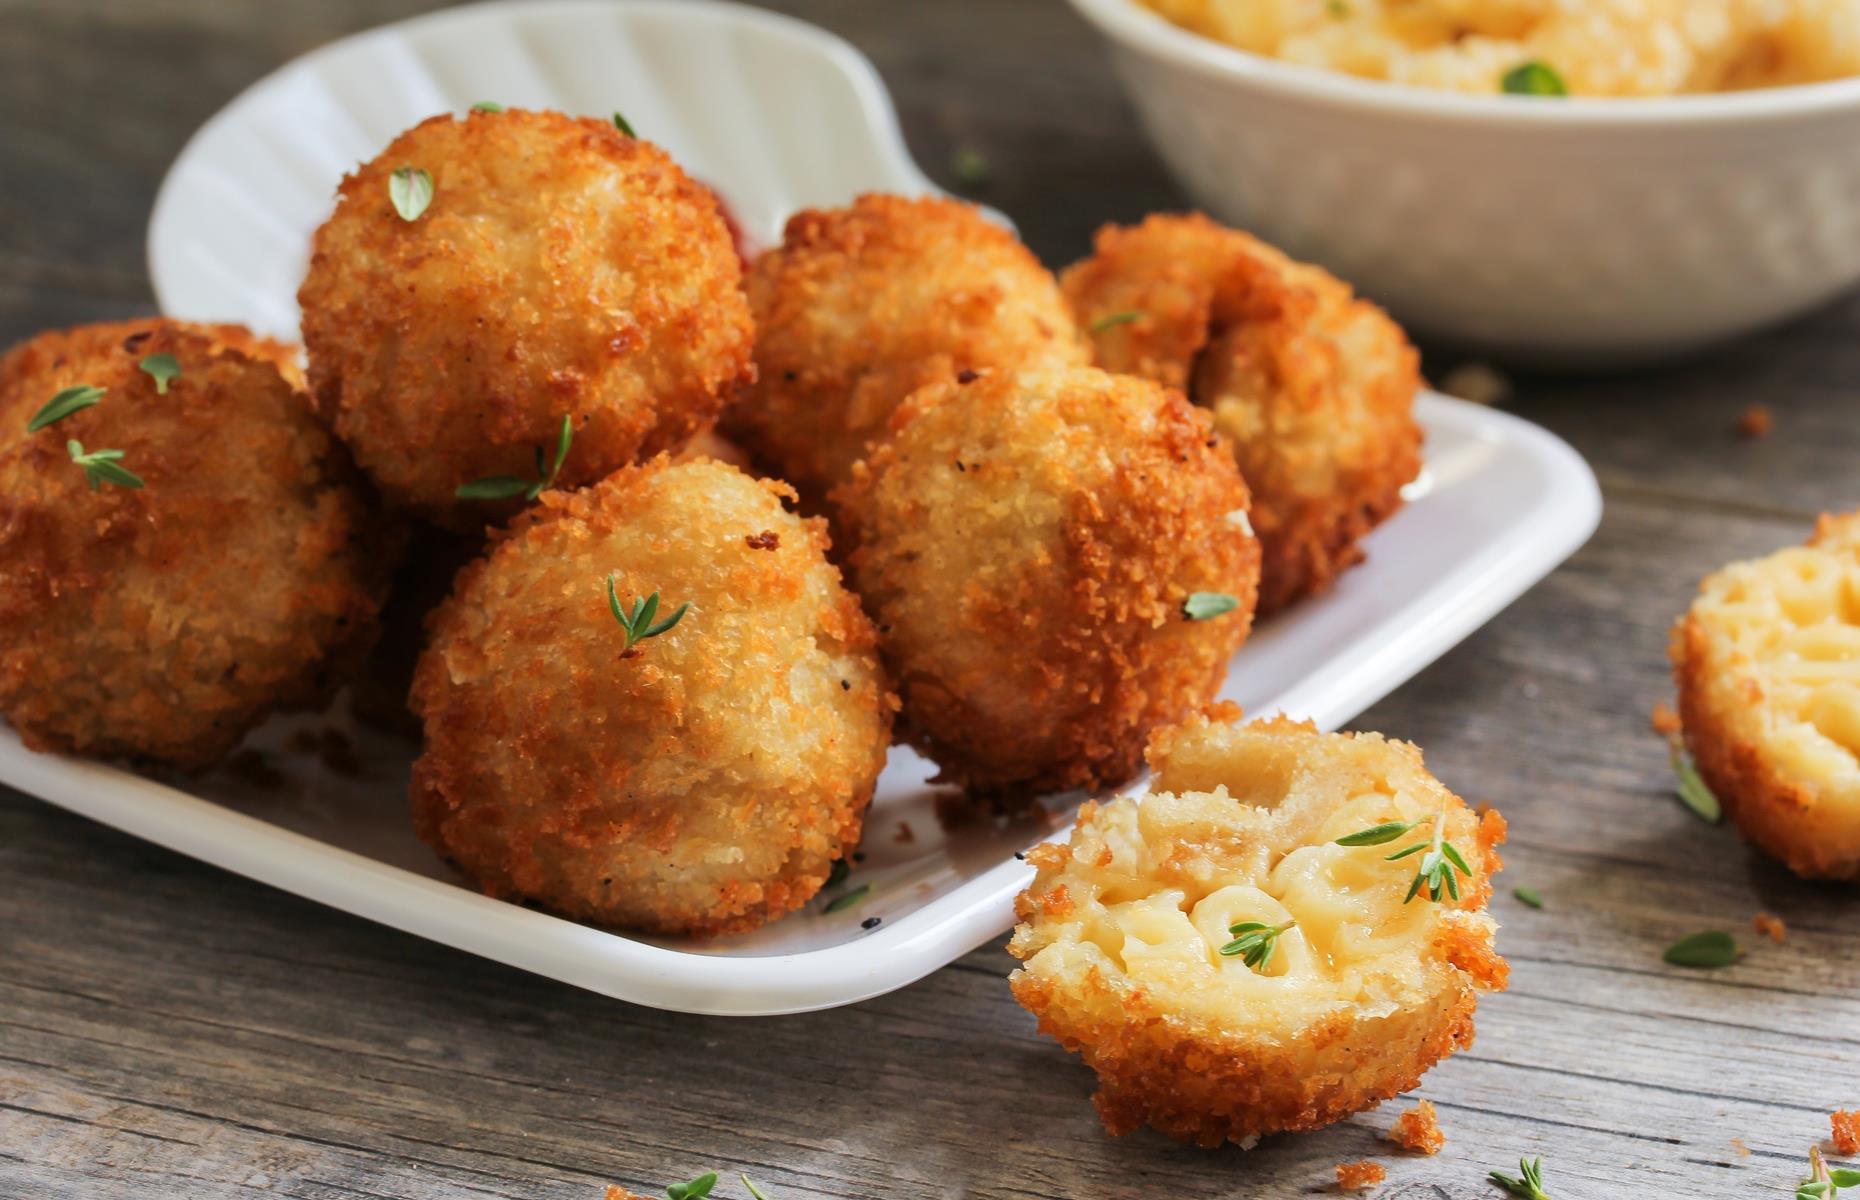 It's rare to have any leftovers with this dish but on the off-chance, you can use cold mac 'n' cheese to make a type of arancini, a traditional fried snack from Italy. Shape leftover mac 'n' cheese into balls, dip in flour, egg and breadcrumbs, then deep-fry. You may need to chop the pasta into slightly smaller bits first.